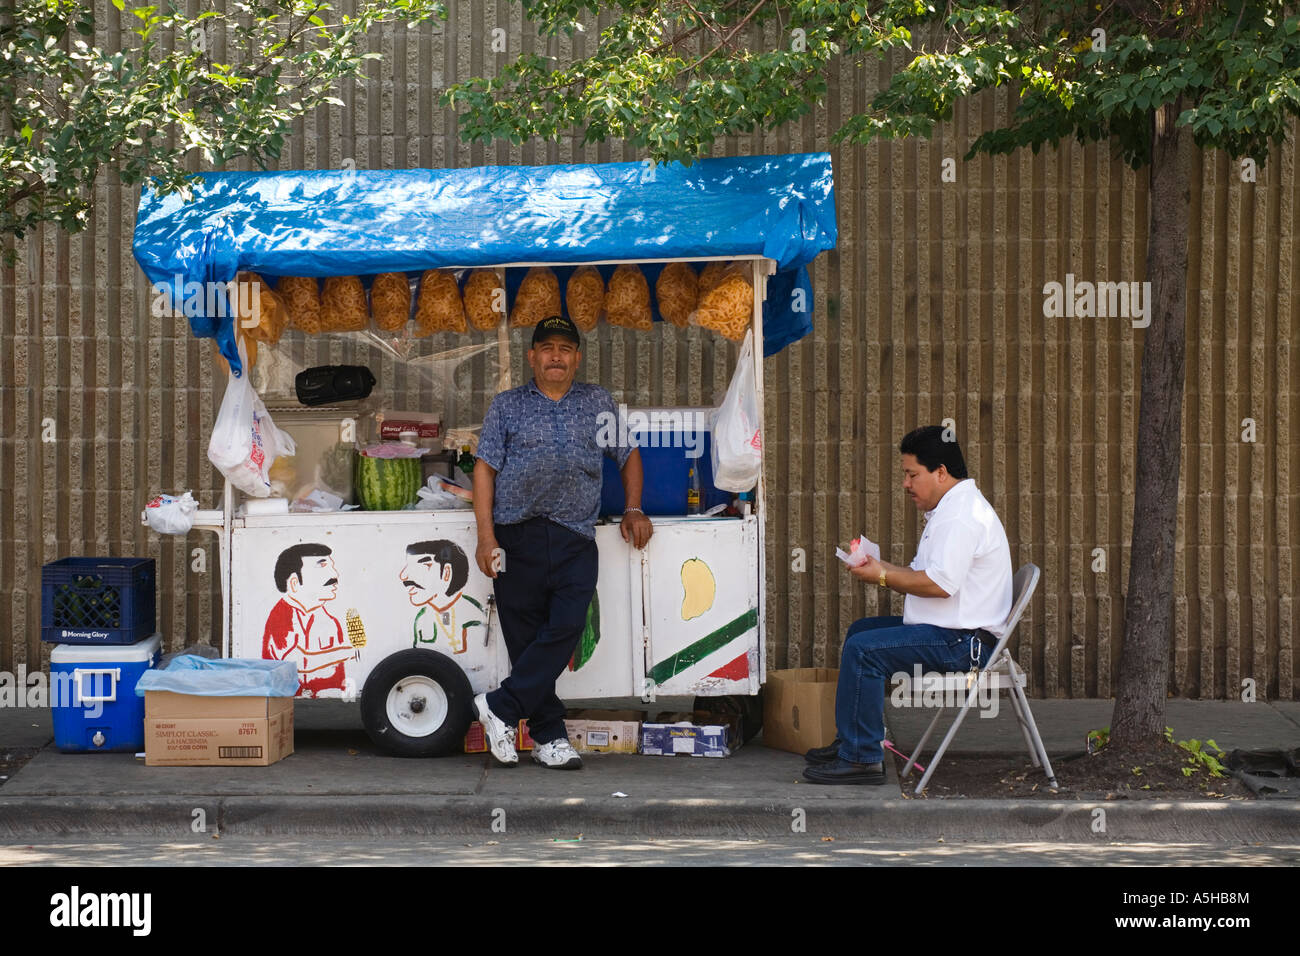 ILLINOIS Chicago Man sit in folding chair on sidewalk eat food purchased from street vendor man stand by cart sell food Stock Photo